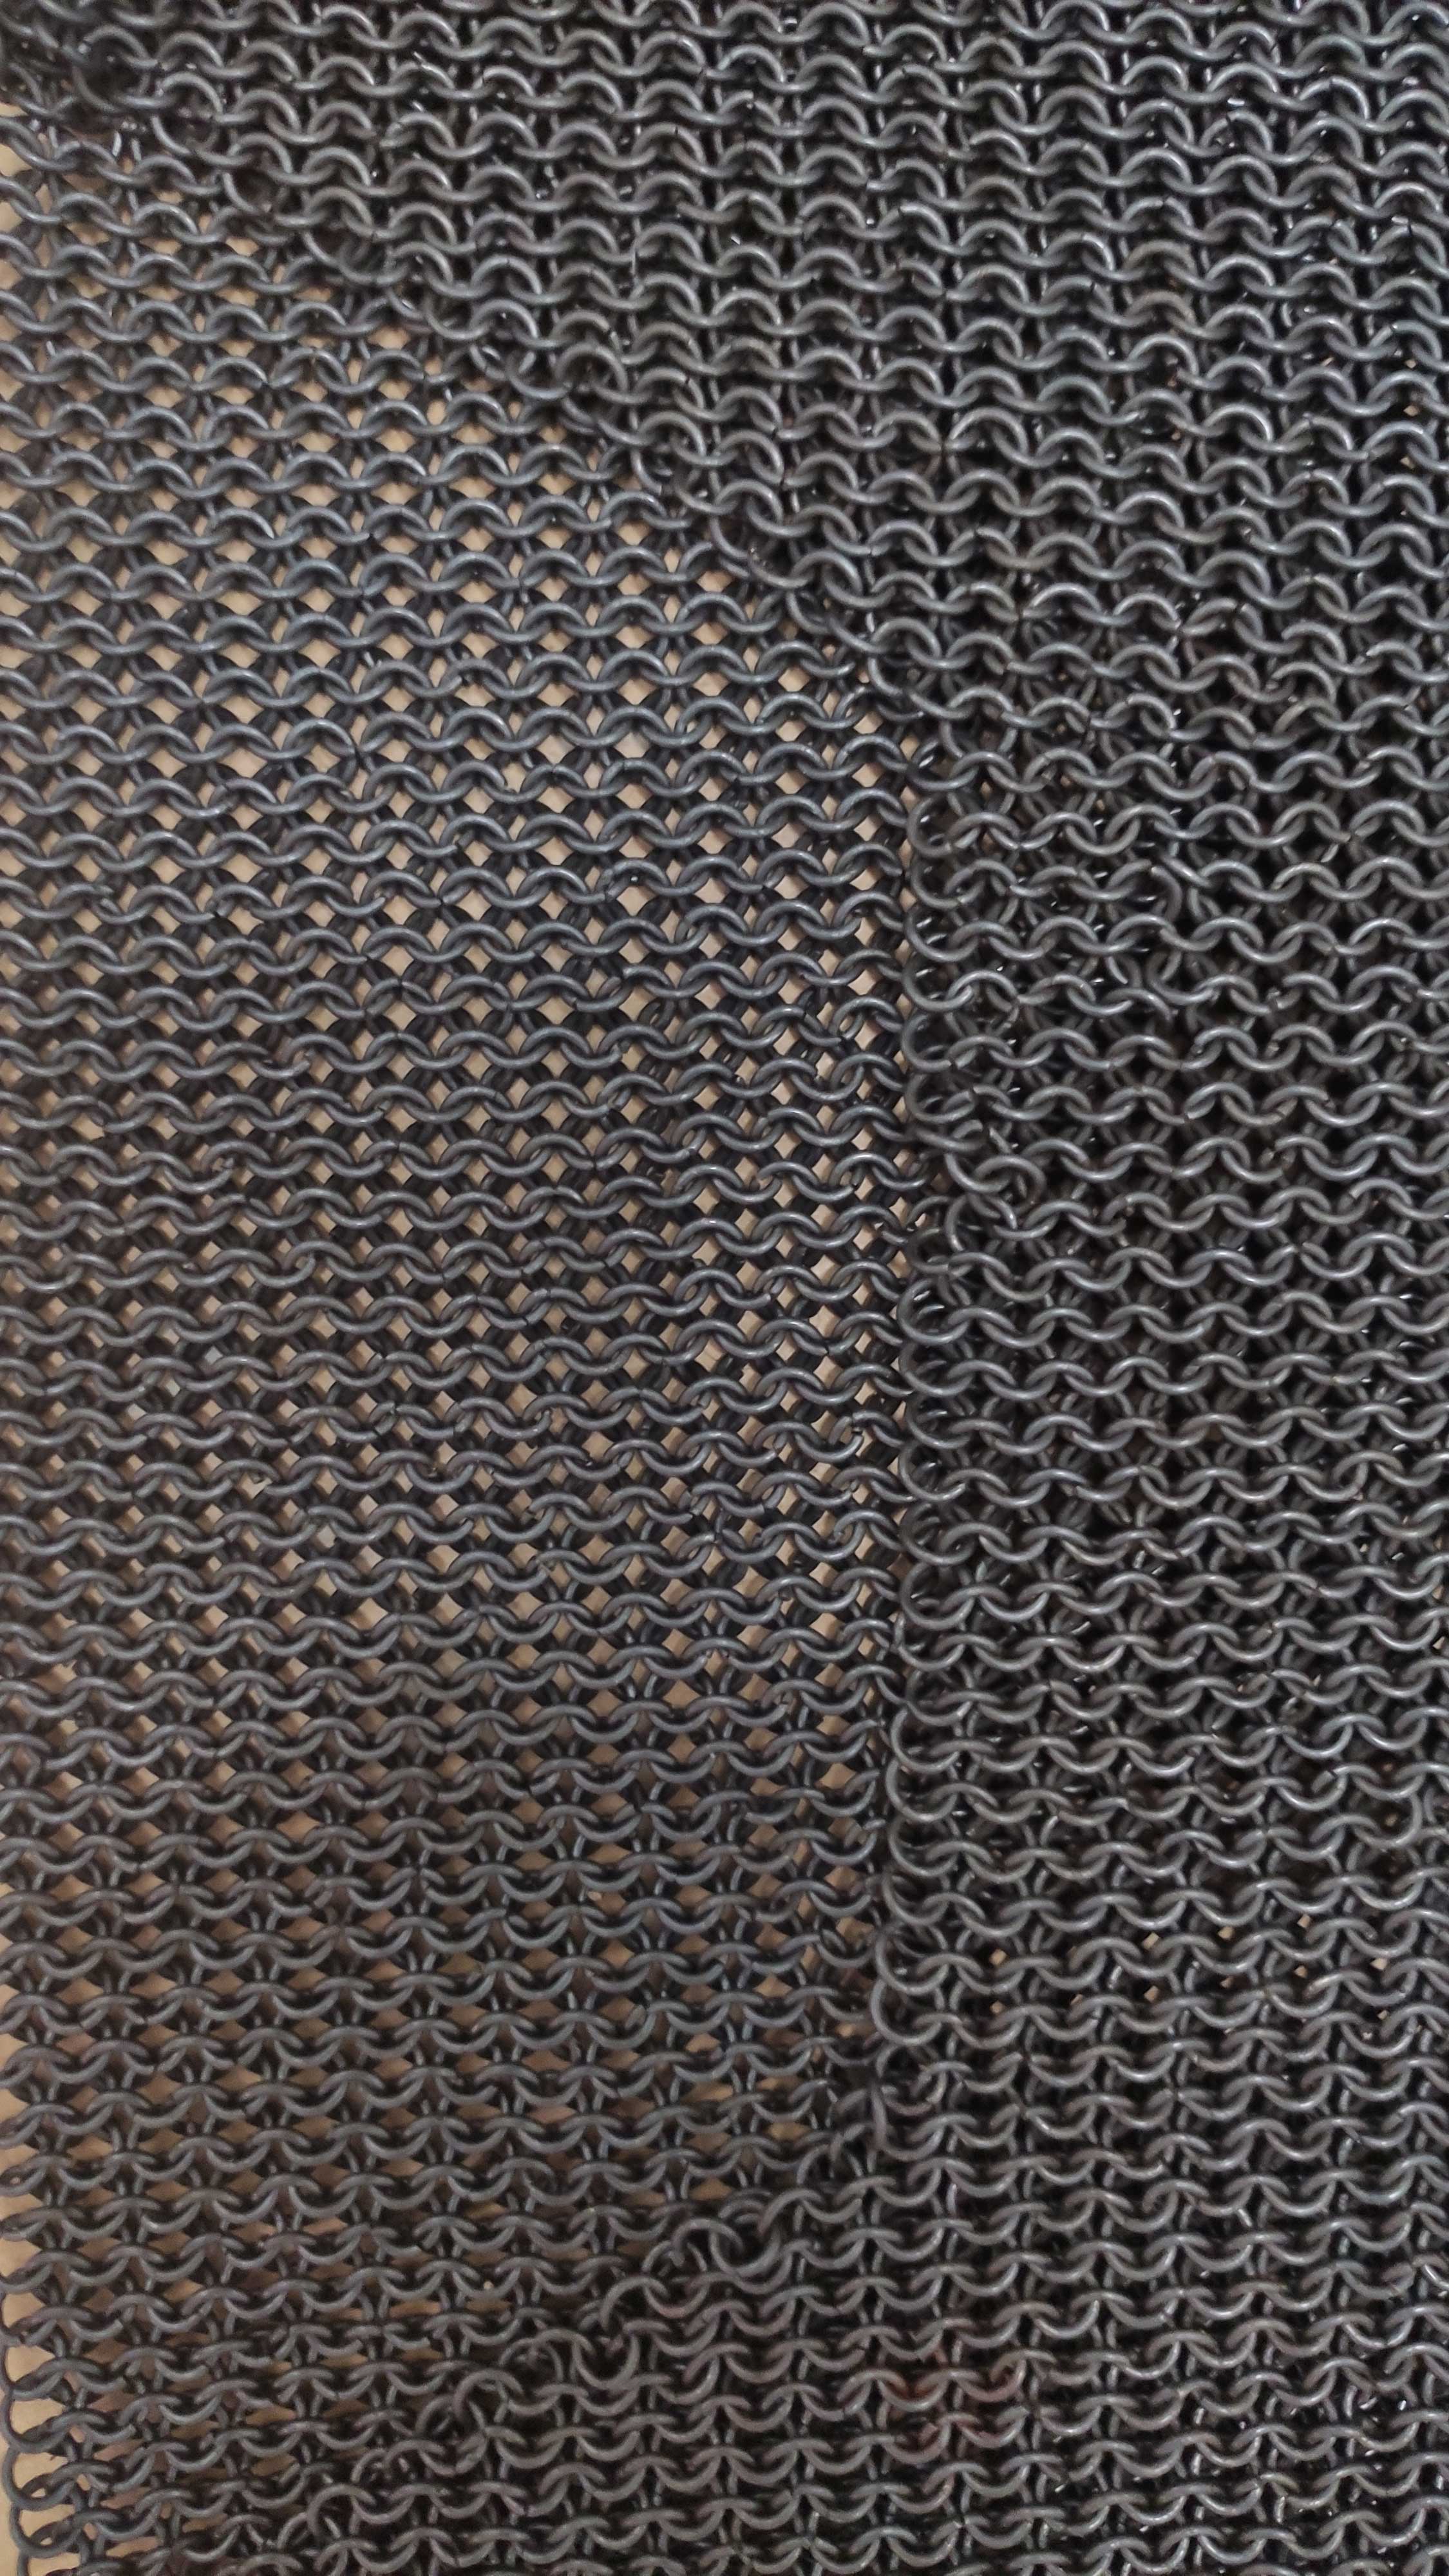 CHAIN MAIL BODY ARMOUR